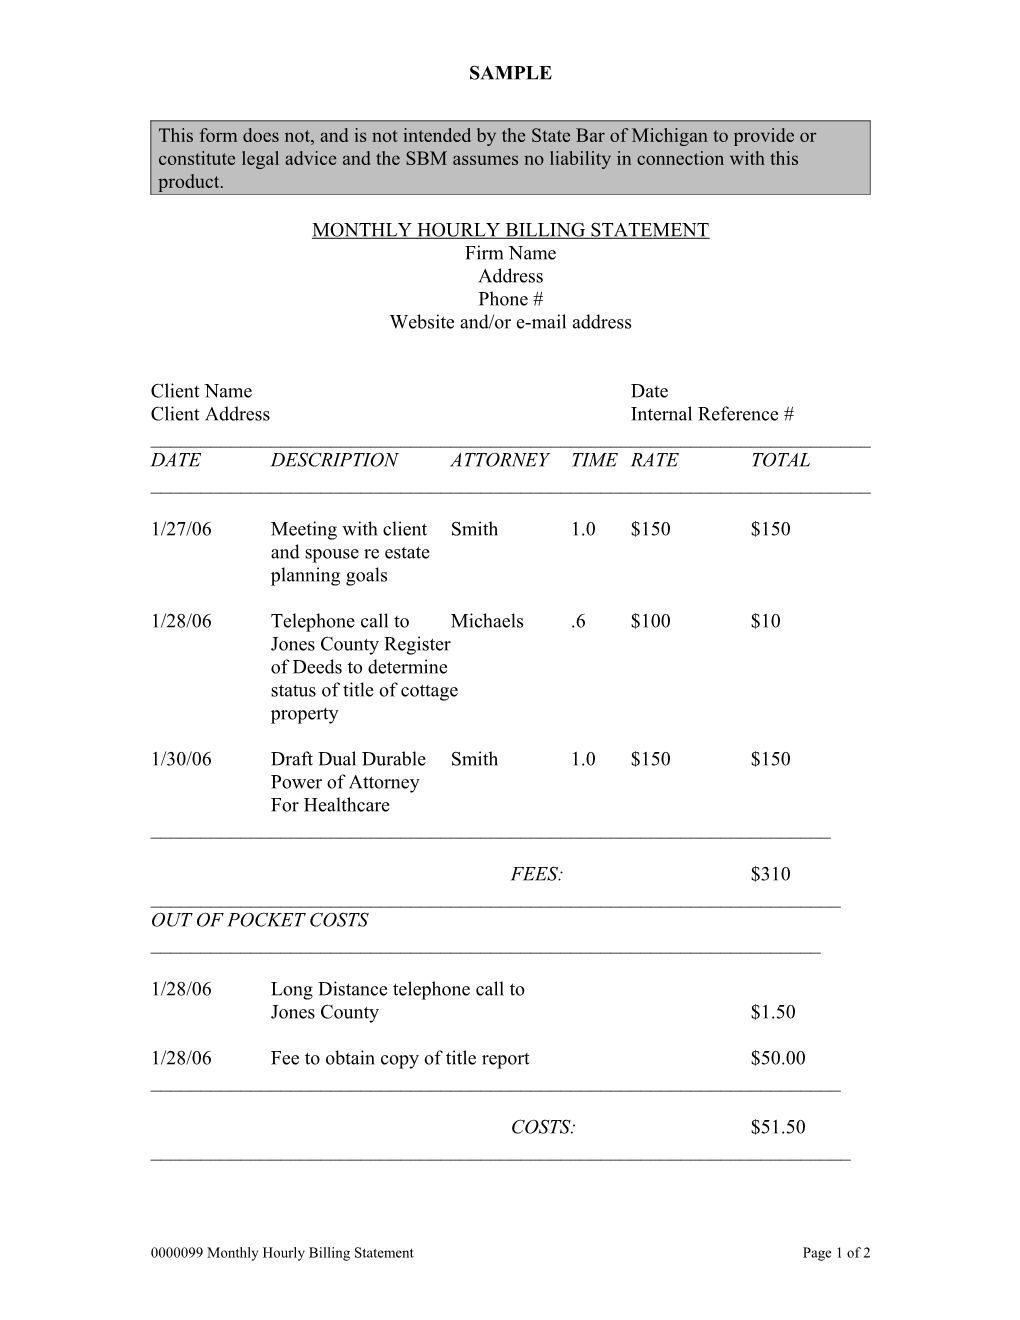 Monthly Hourly Billing Statement